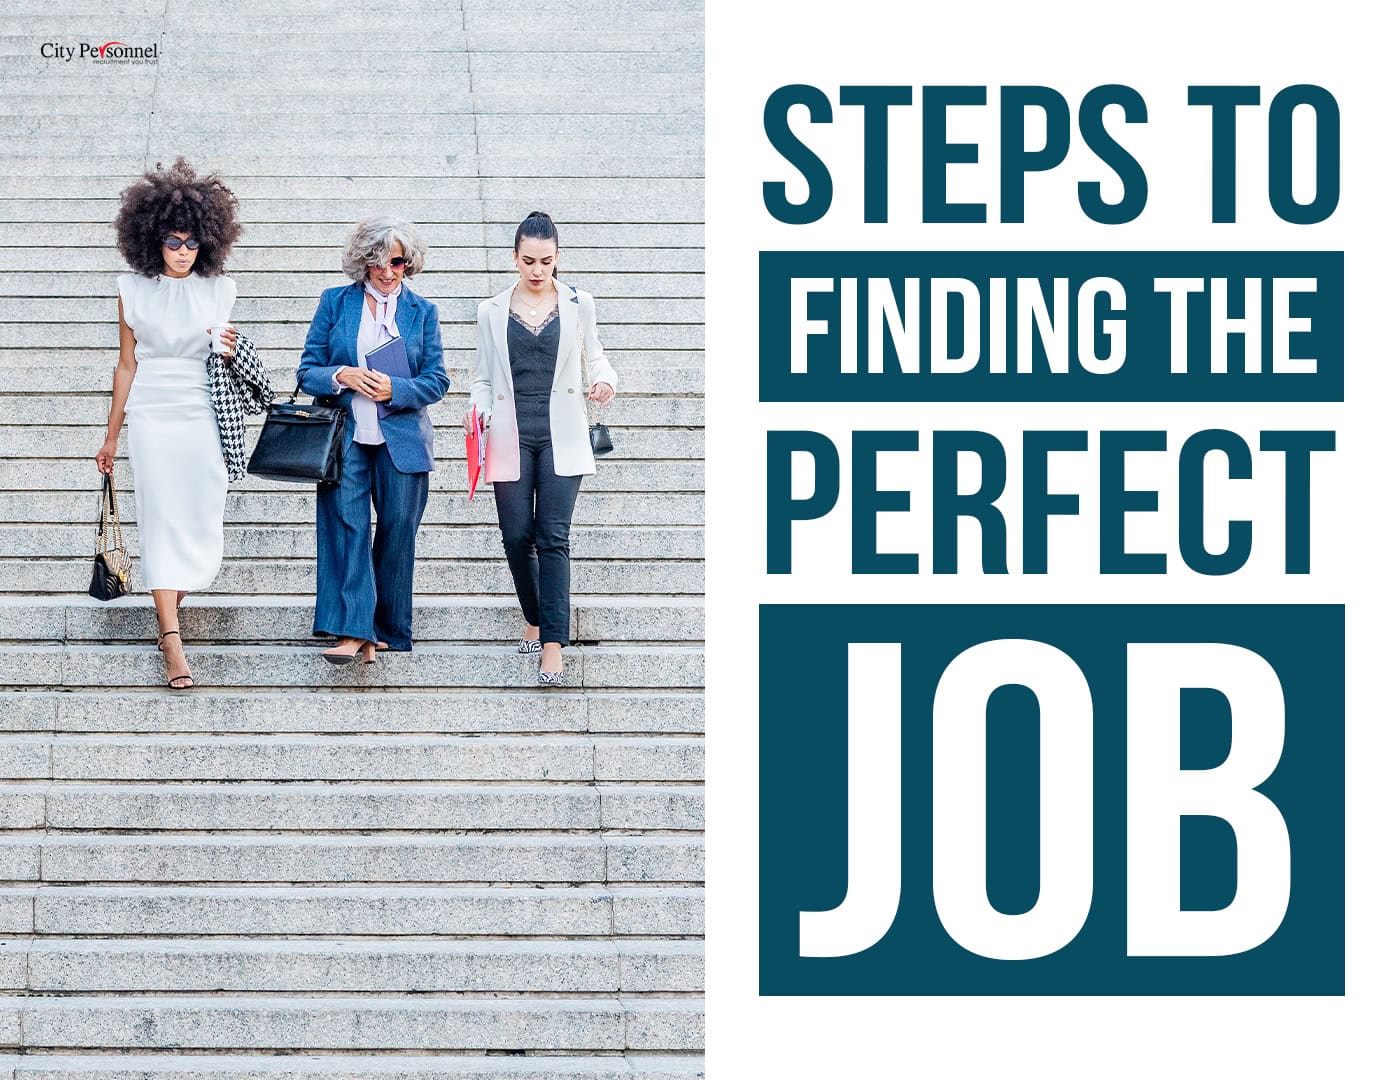 Steps to Finding the Perfect Job